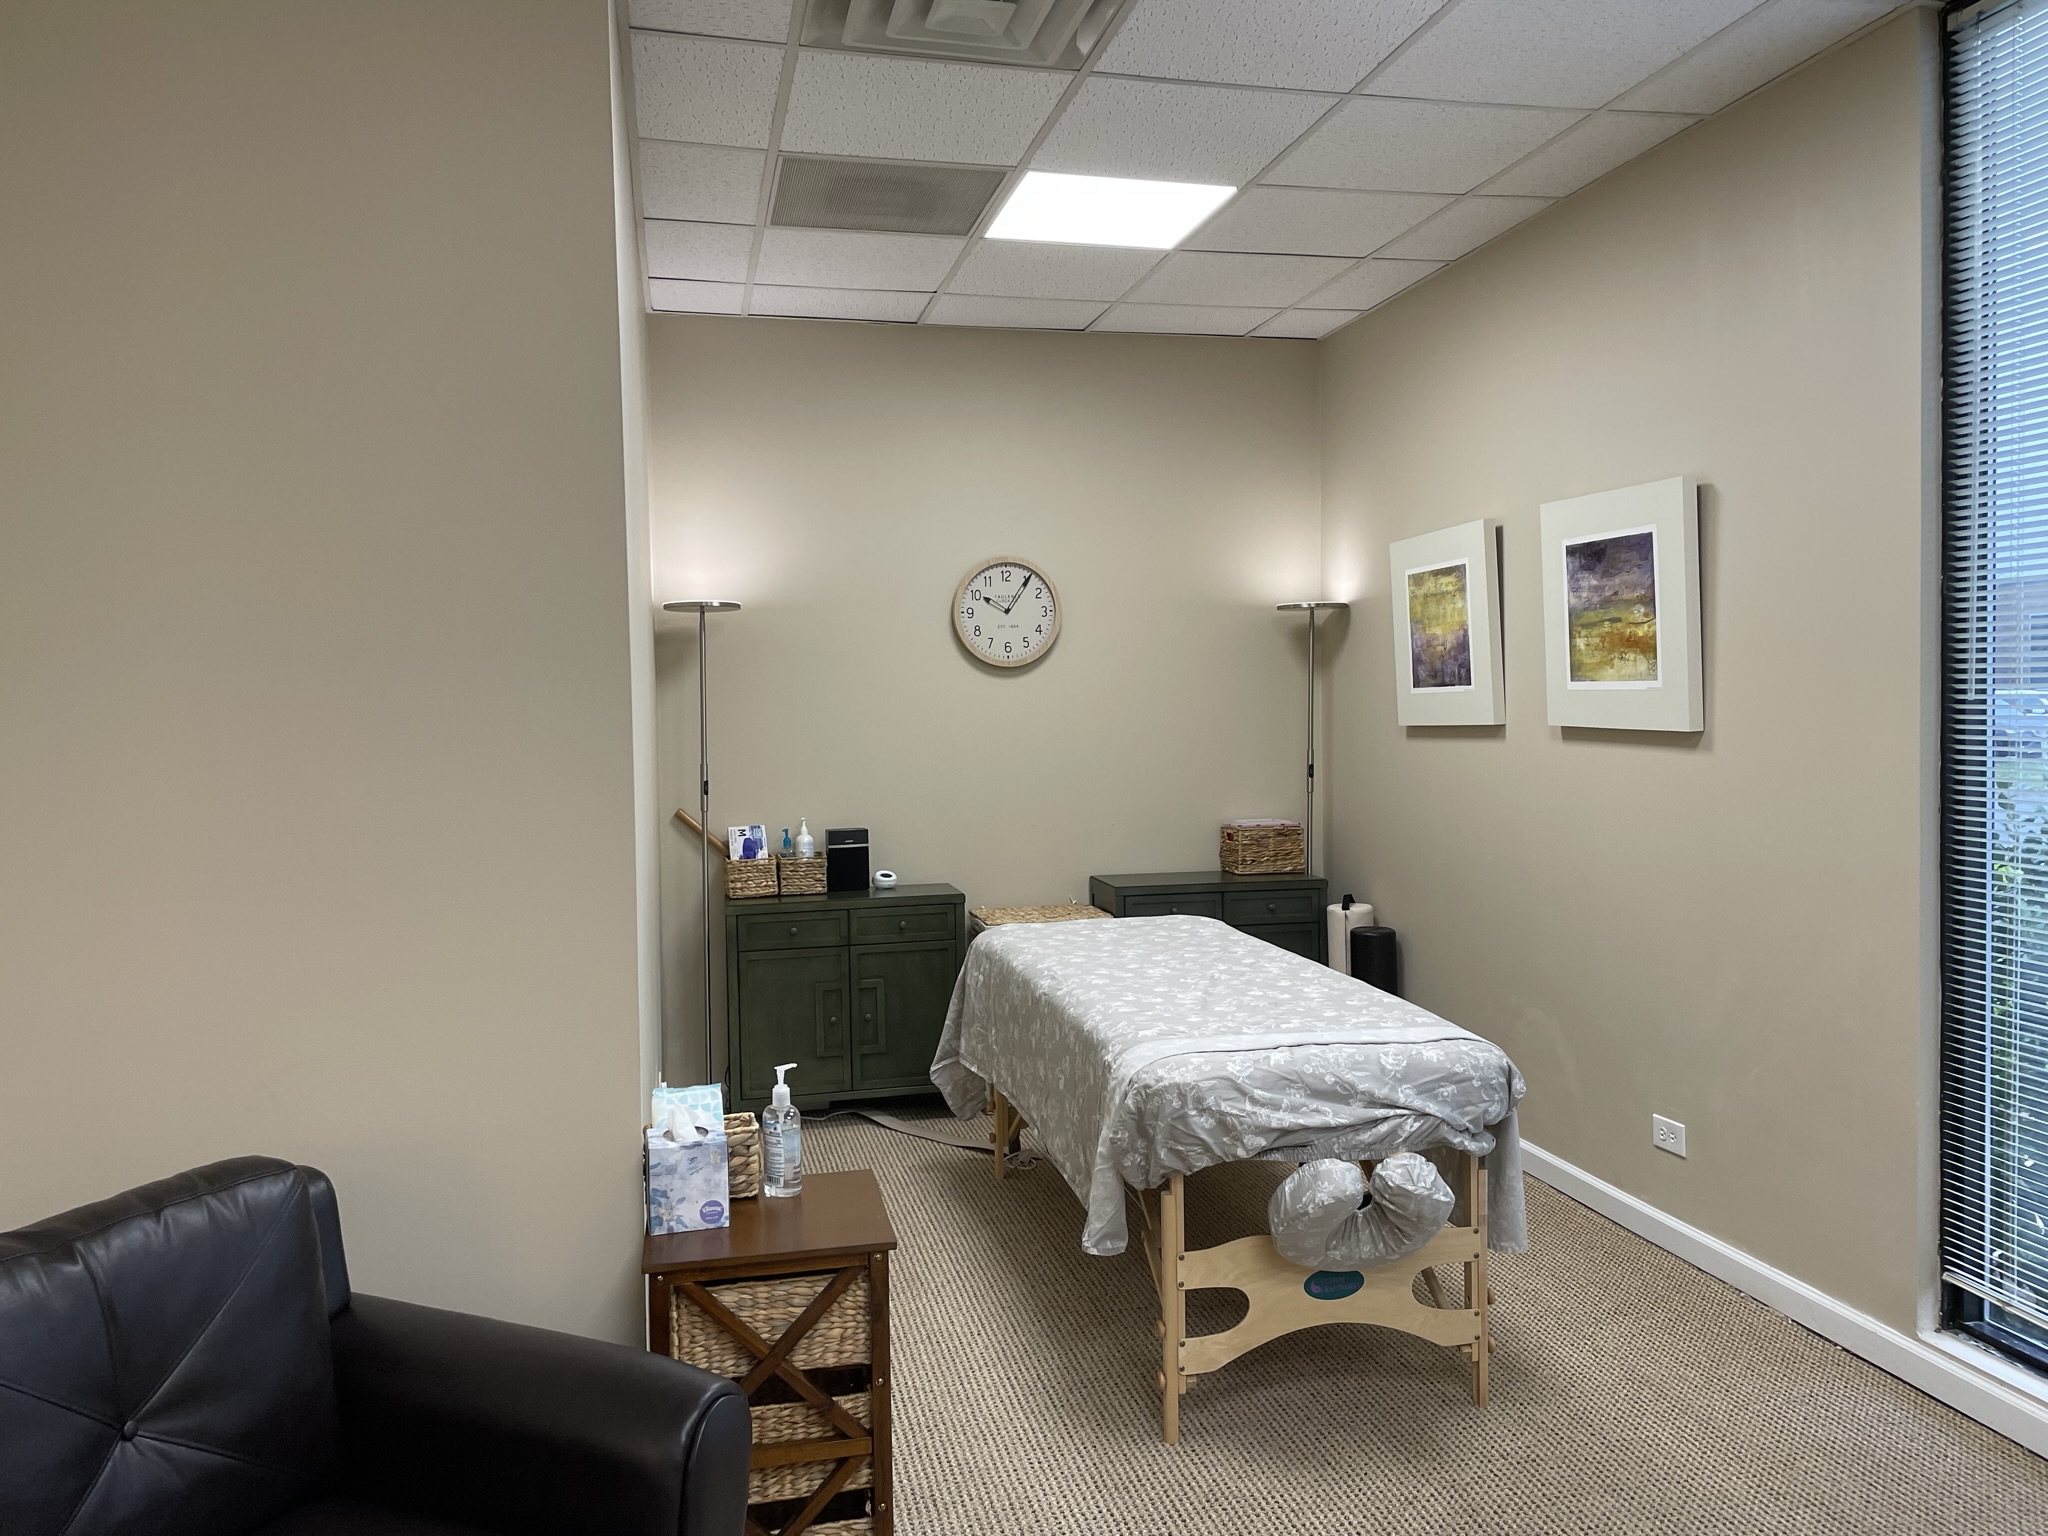 Relief Physical Therapy treatment room #2